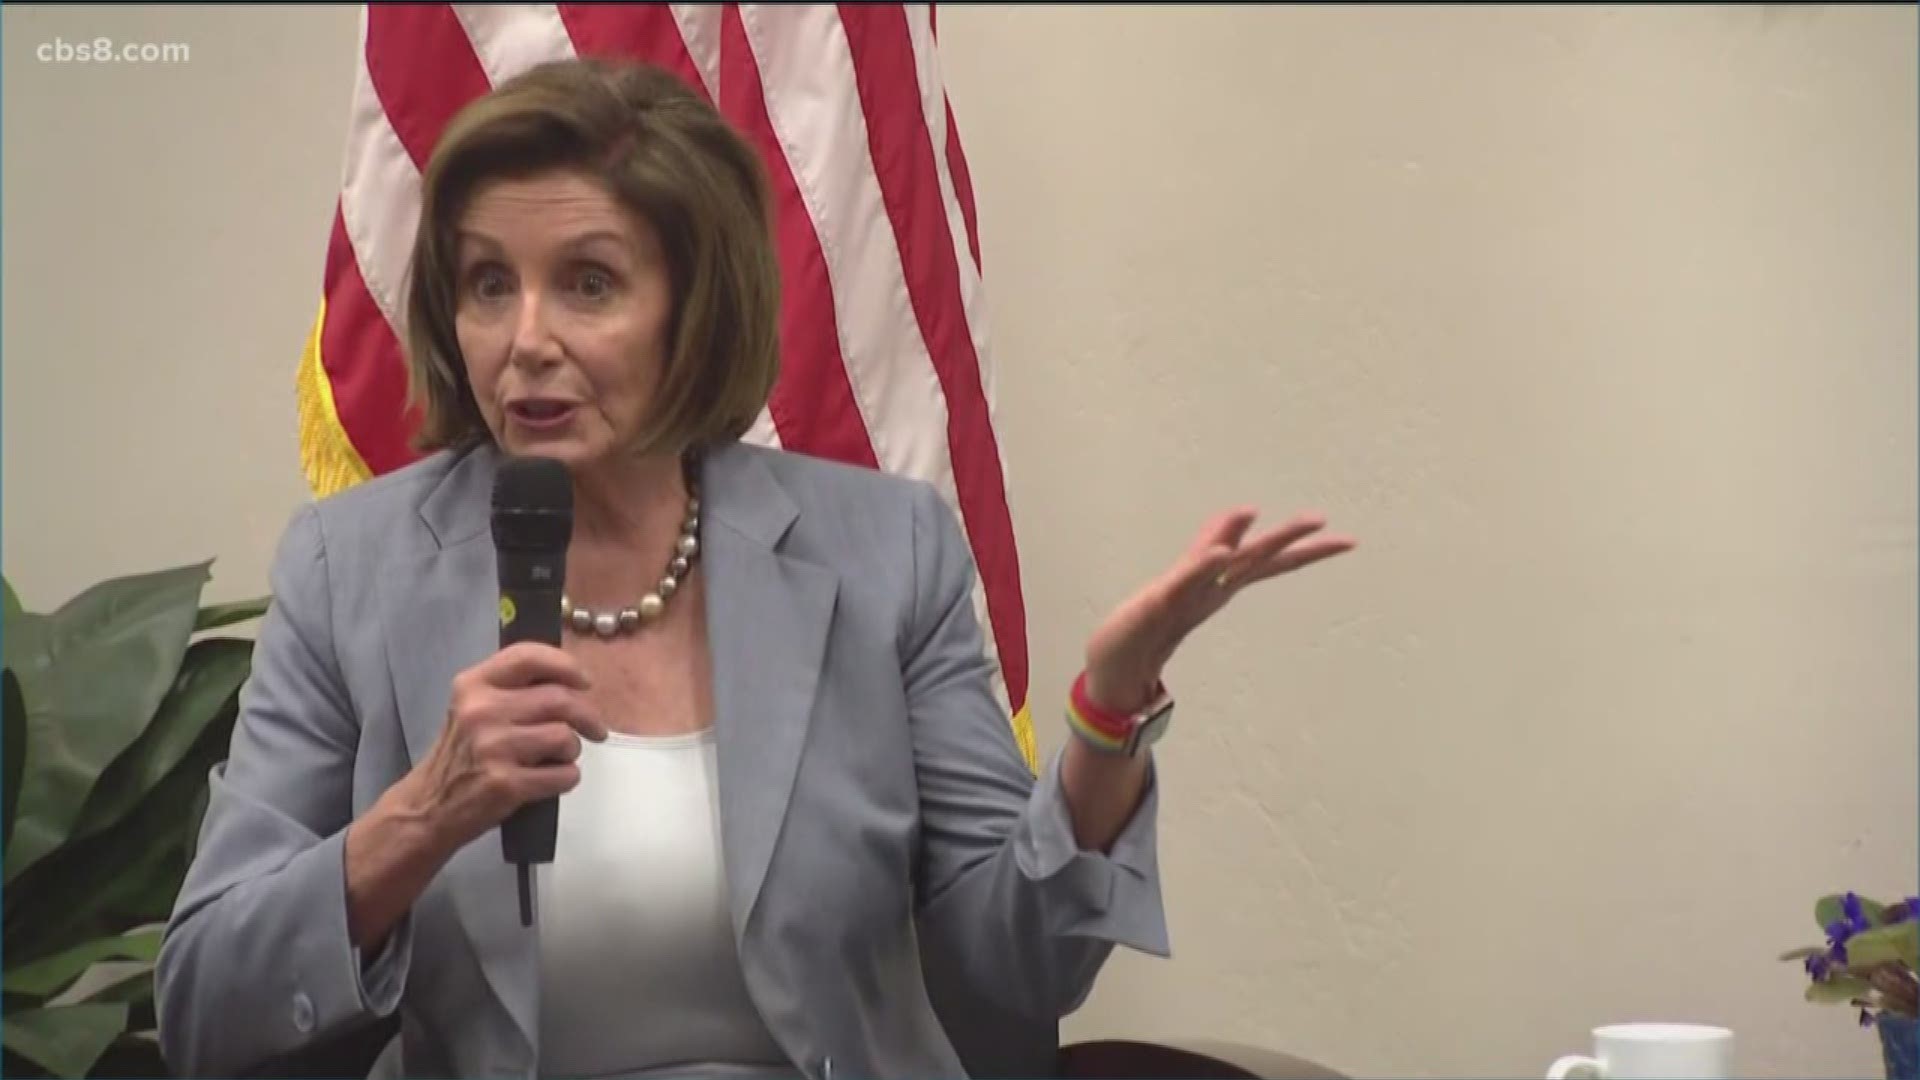 House Speaker Nancy Pelosi, D-San Francisco, on Monday held a discussion with Rep. Mike Levin, D-Oceanside, on campaign finance and ethics reform.